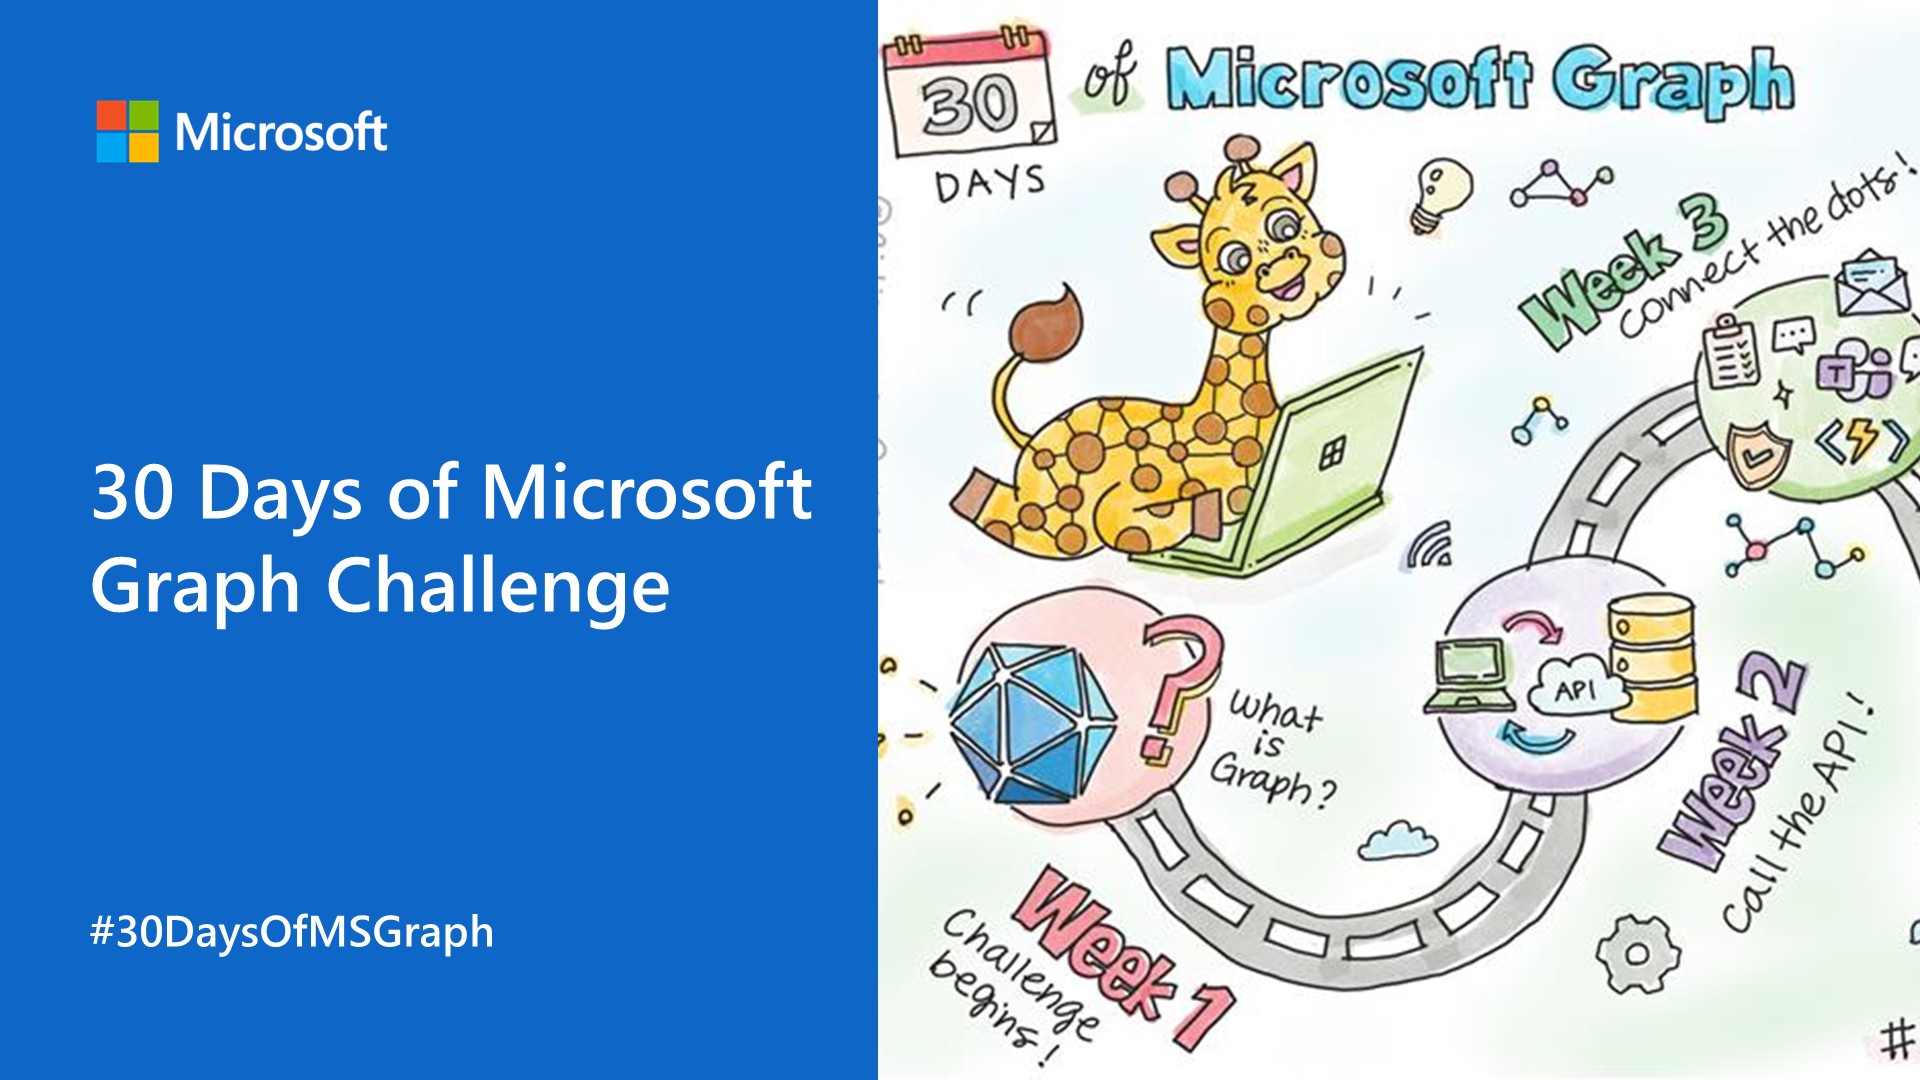 Join the 30 Days of Microsoft Graph Challenge